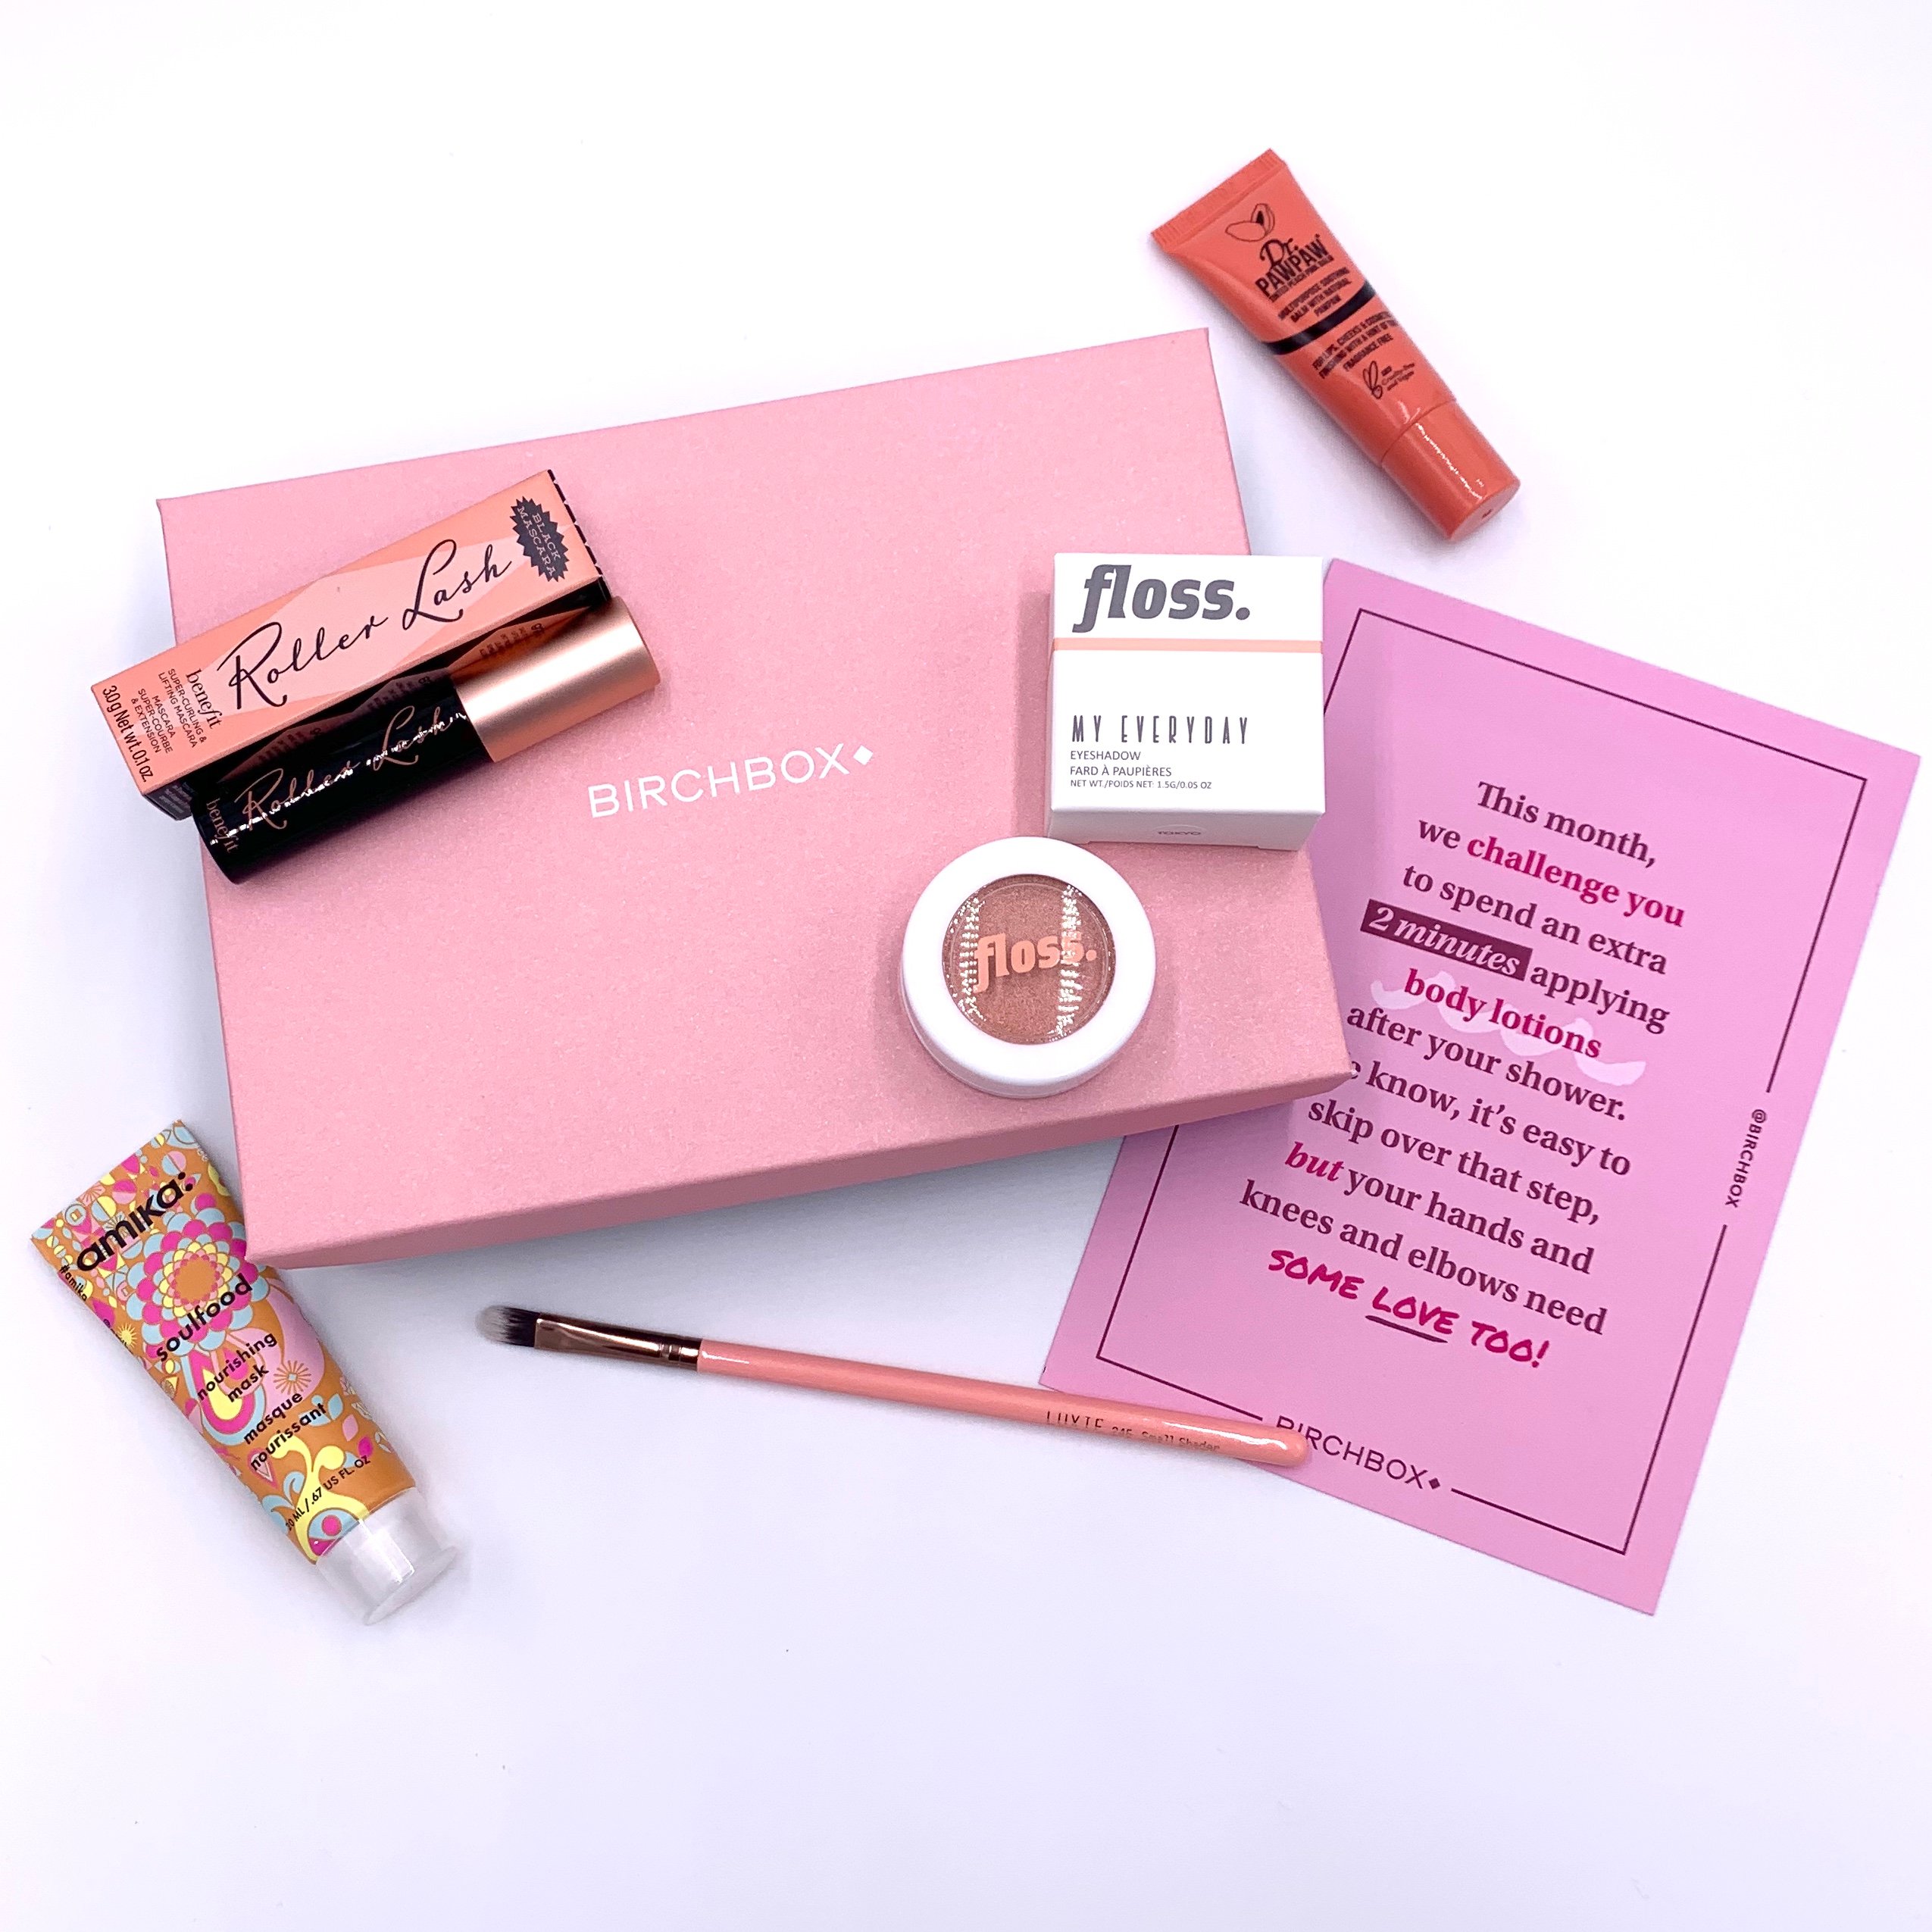 Full Contents for BirchBox July 2020